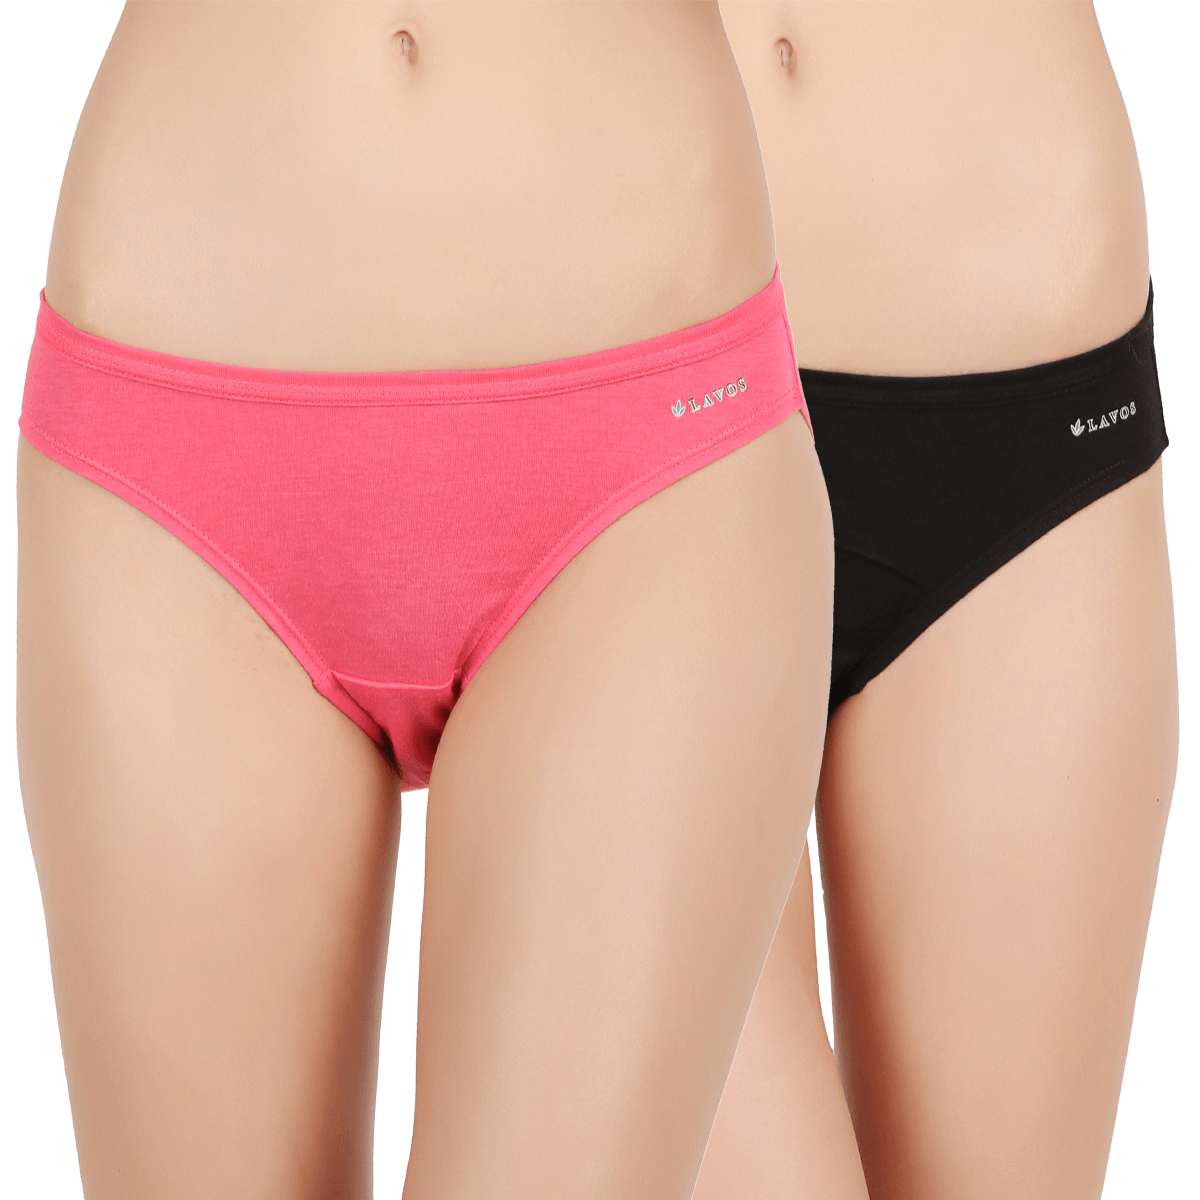 https://www.lavosperformance.com/cdn/shop/products/lavos-womens-bikini-panty-pack-of-3-assorted-womens-chart-lavos-performance-s-888435.png?v=1632037900&width=1200